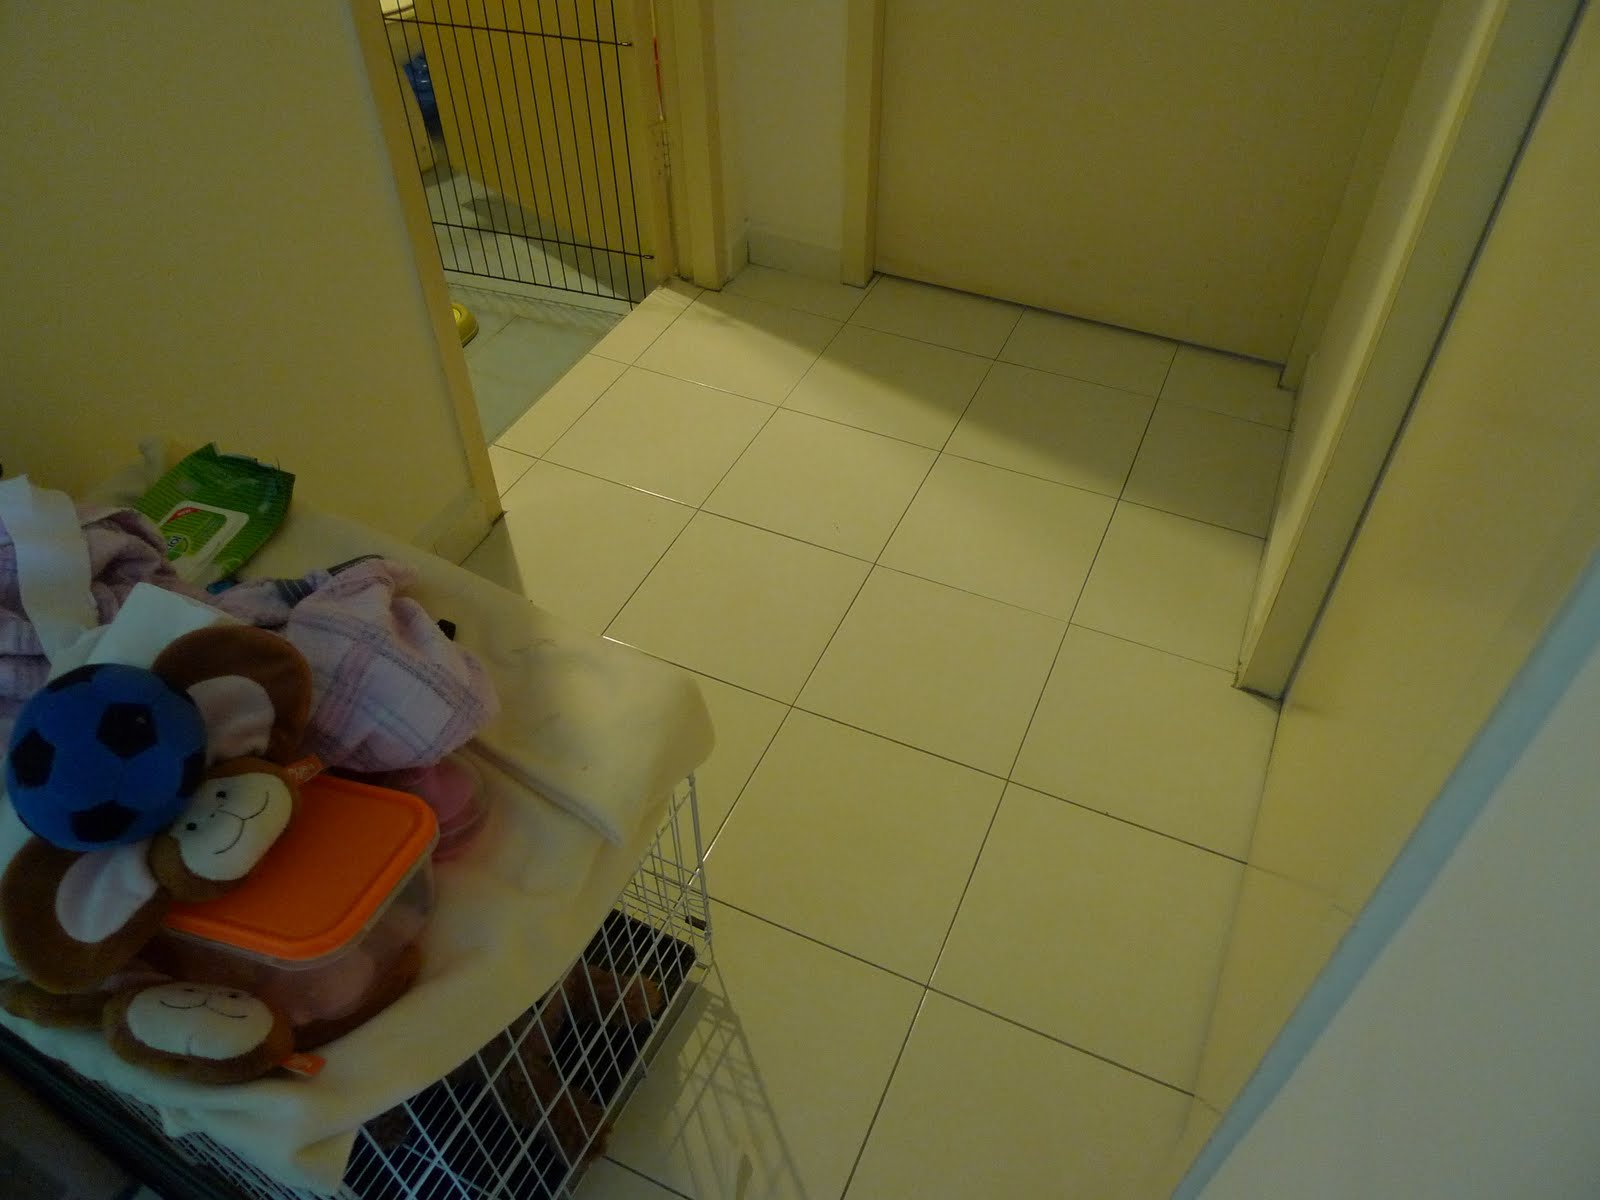 This is the play pen we set up, we feed her in the crate and placed ...